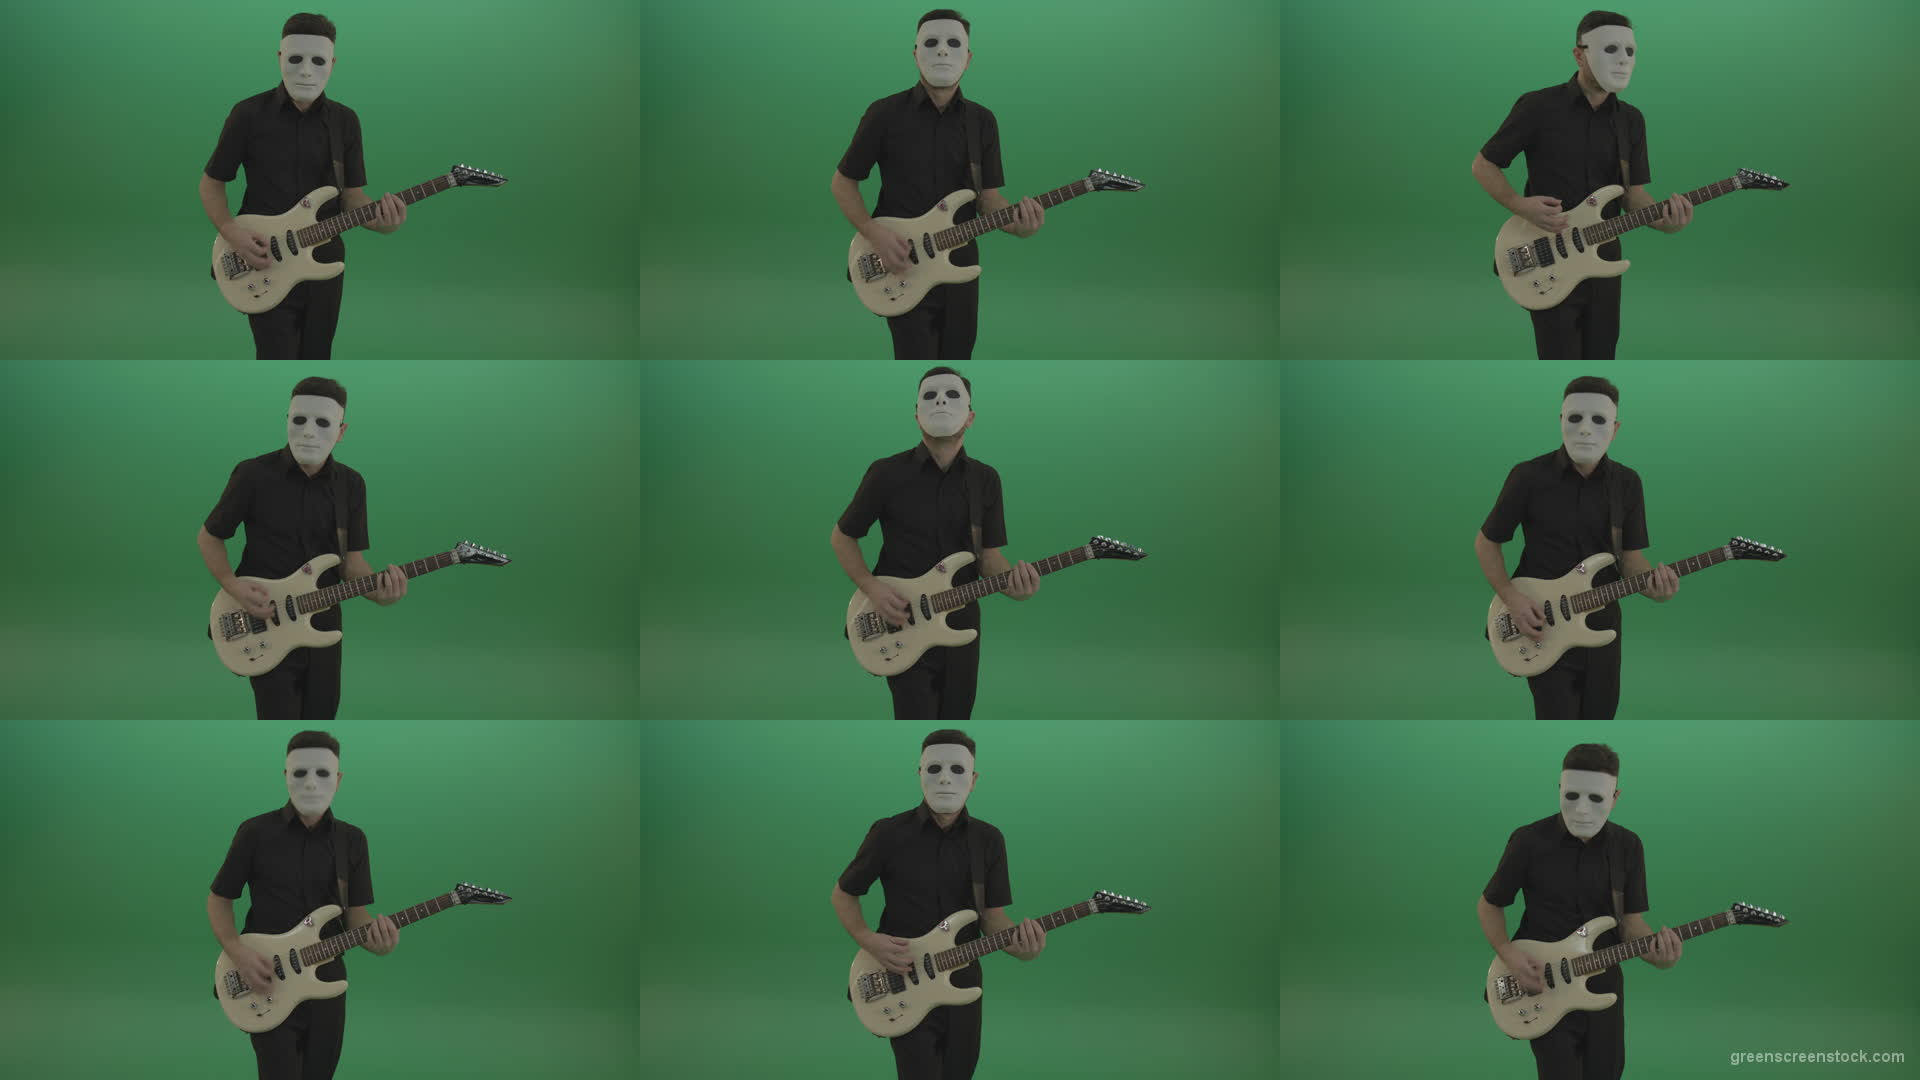 Rock-man-in-white-mask-and-black-wear-playing-guitar-isolated-on-green-screen-in-front-view Green Screen Stock